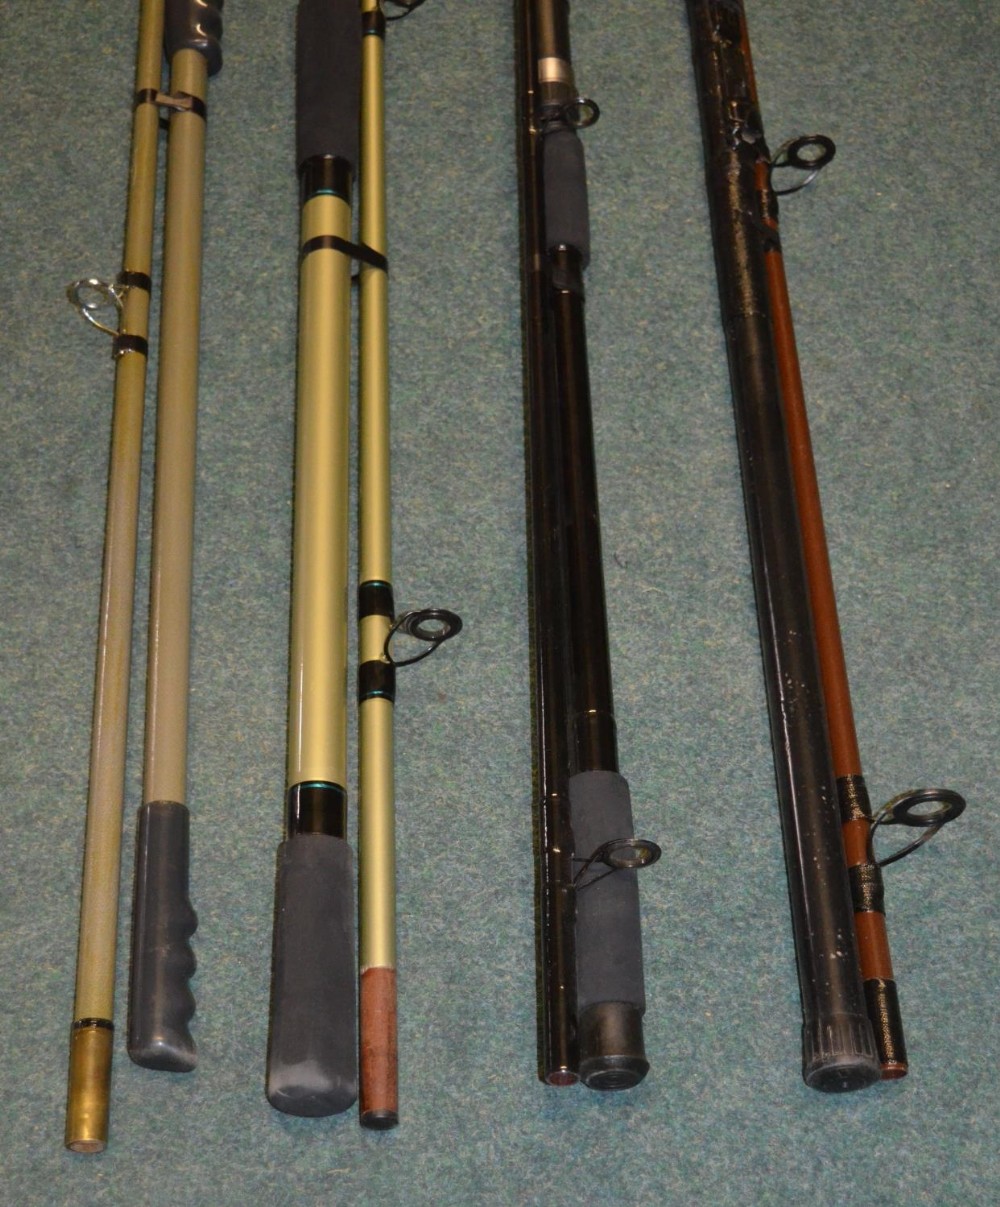 4 carbon fibre 2 piece fishing rods - modern Shakespeare 12ft "In2 Beachcaster", vintage "Castaway" - Image 4 of 7